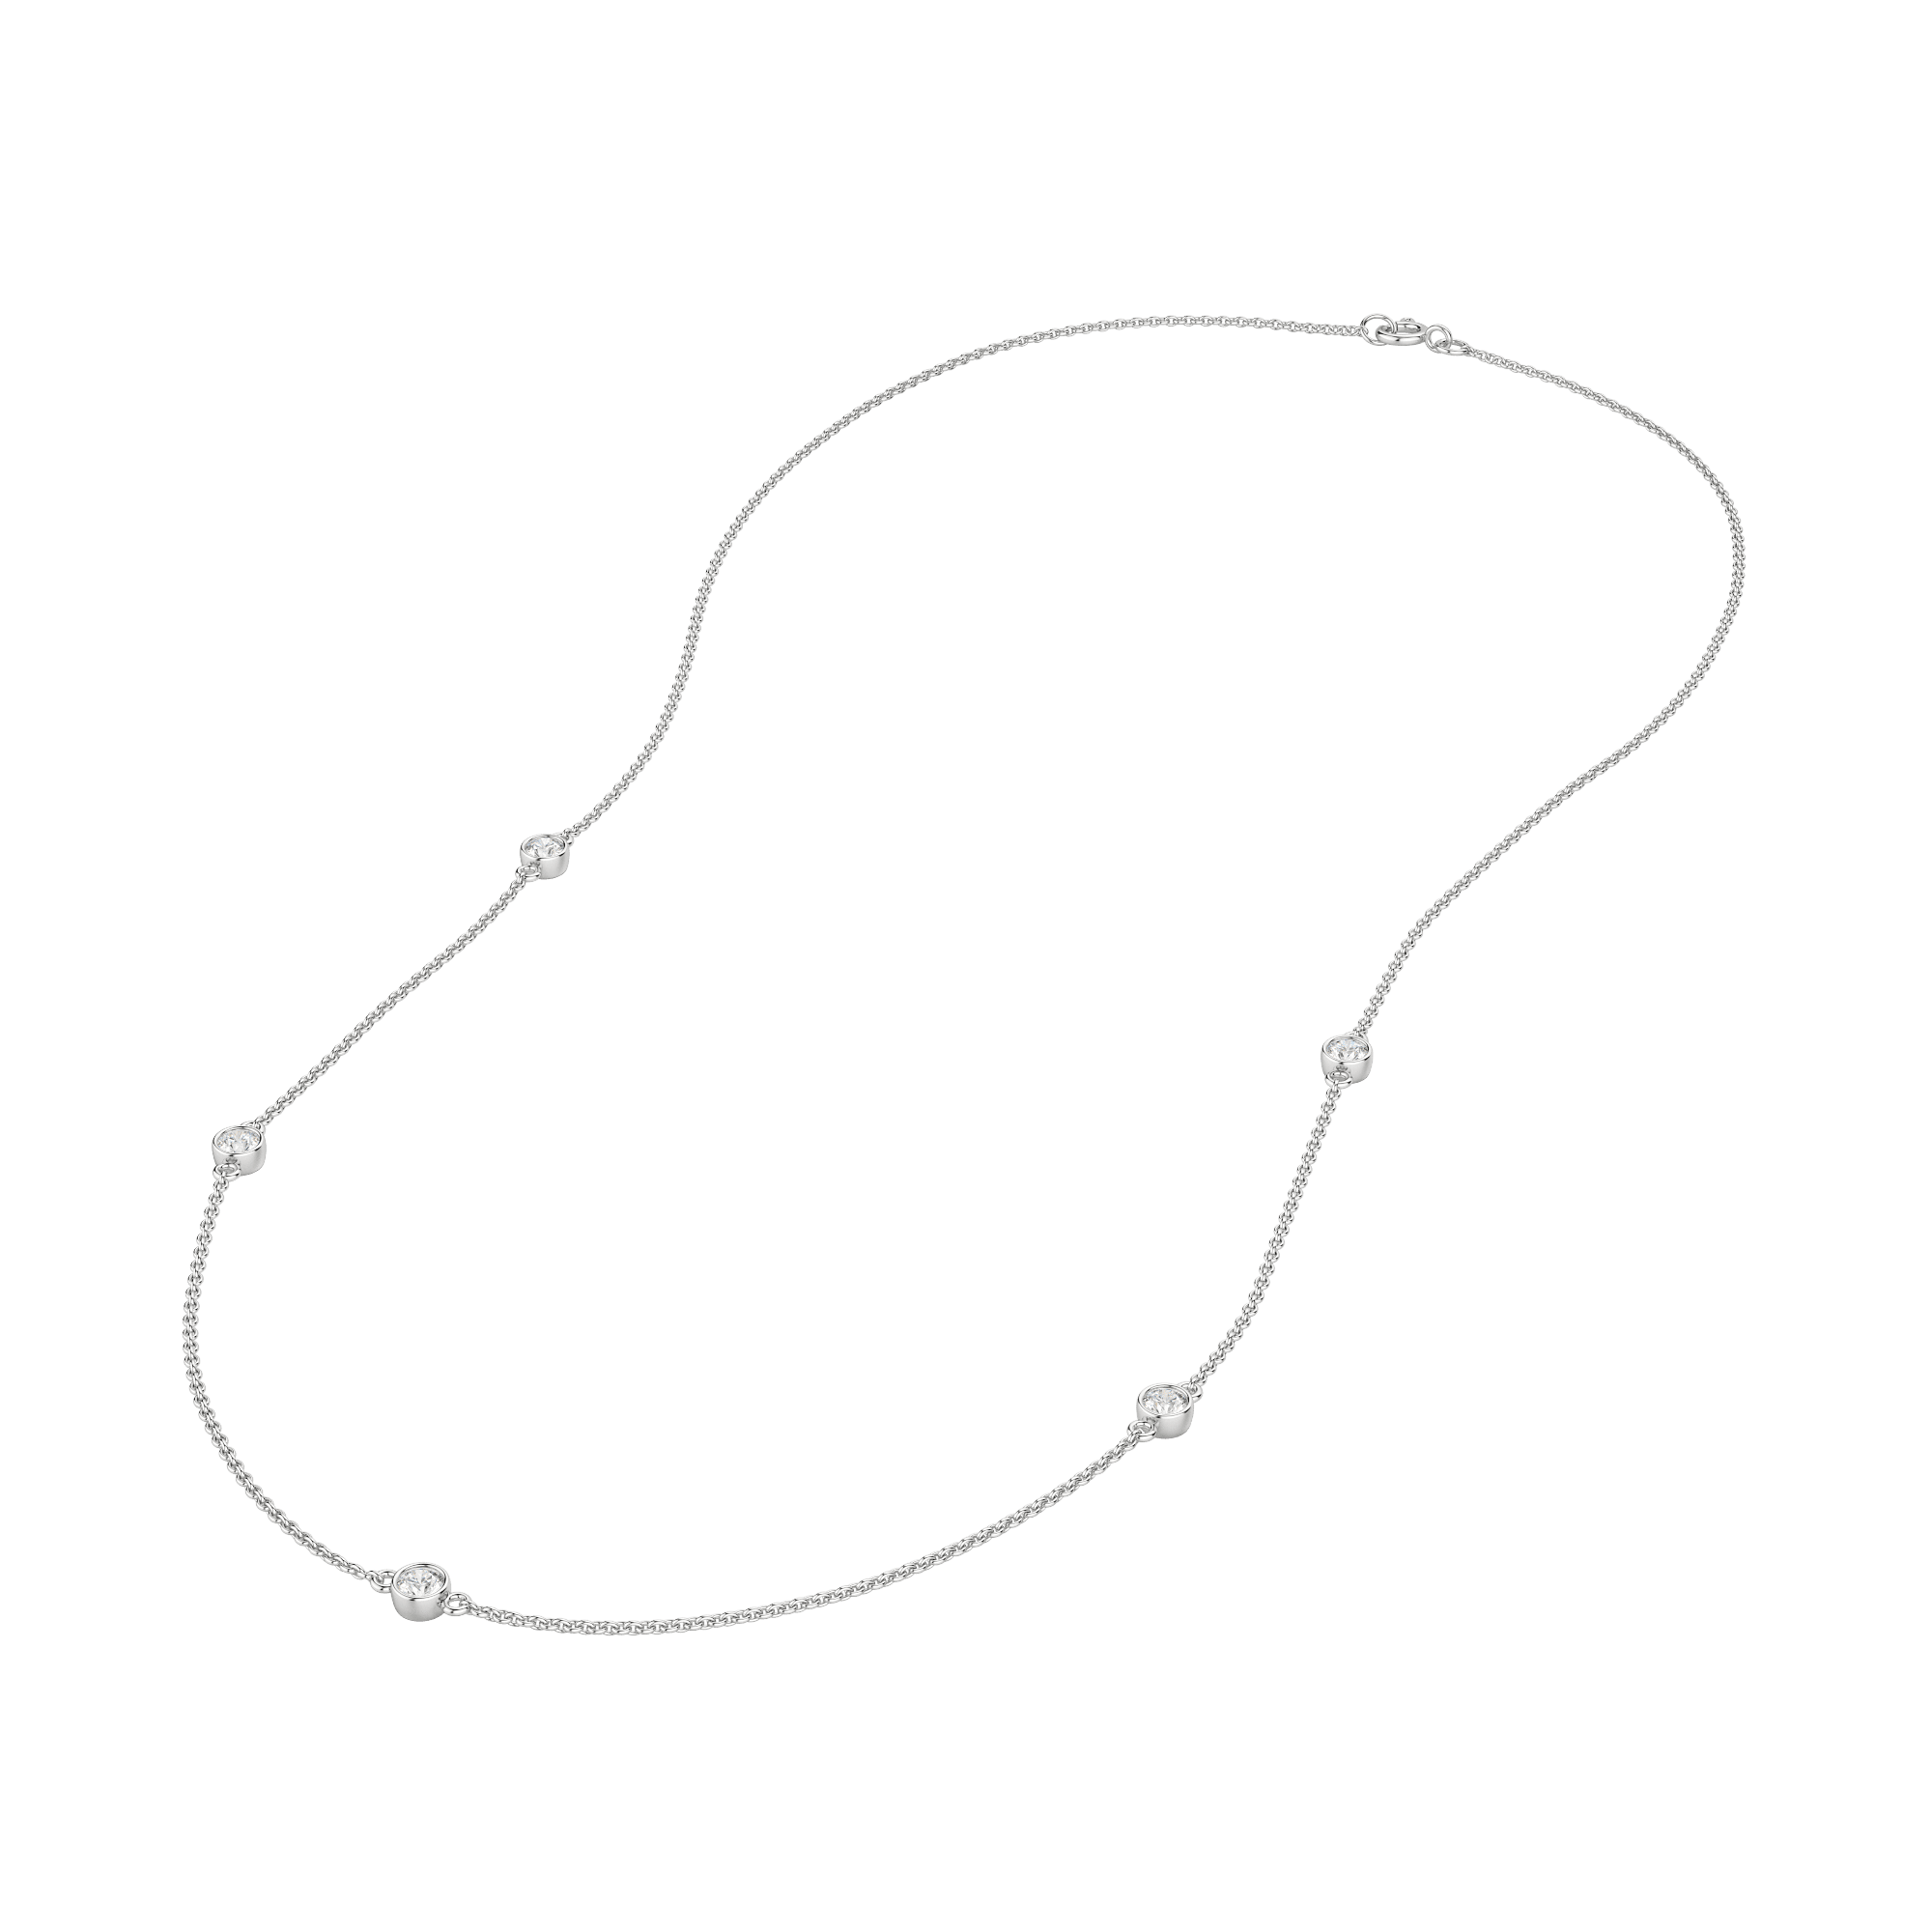 5-Stone Station Necklace, Hover, 14K White Gold, 